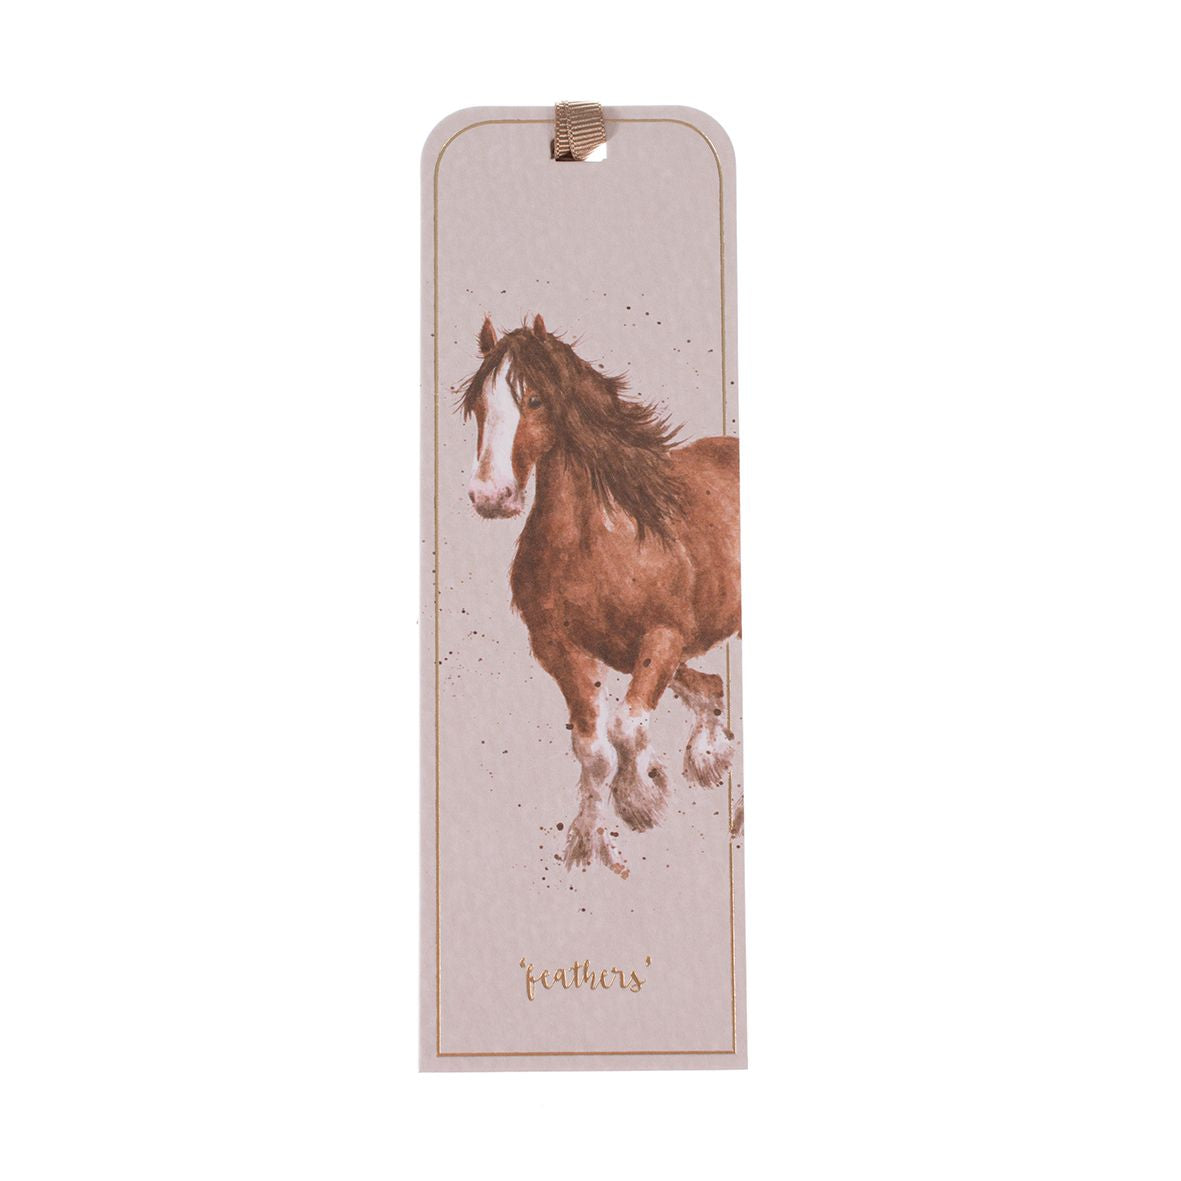 Wrendale Bookmark - Feathers Horse - 020 